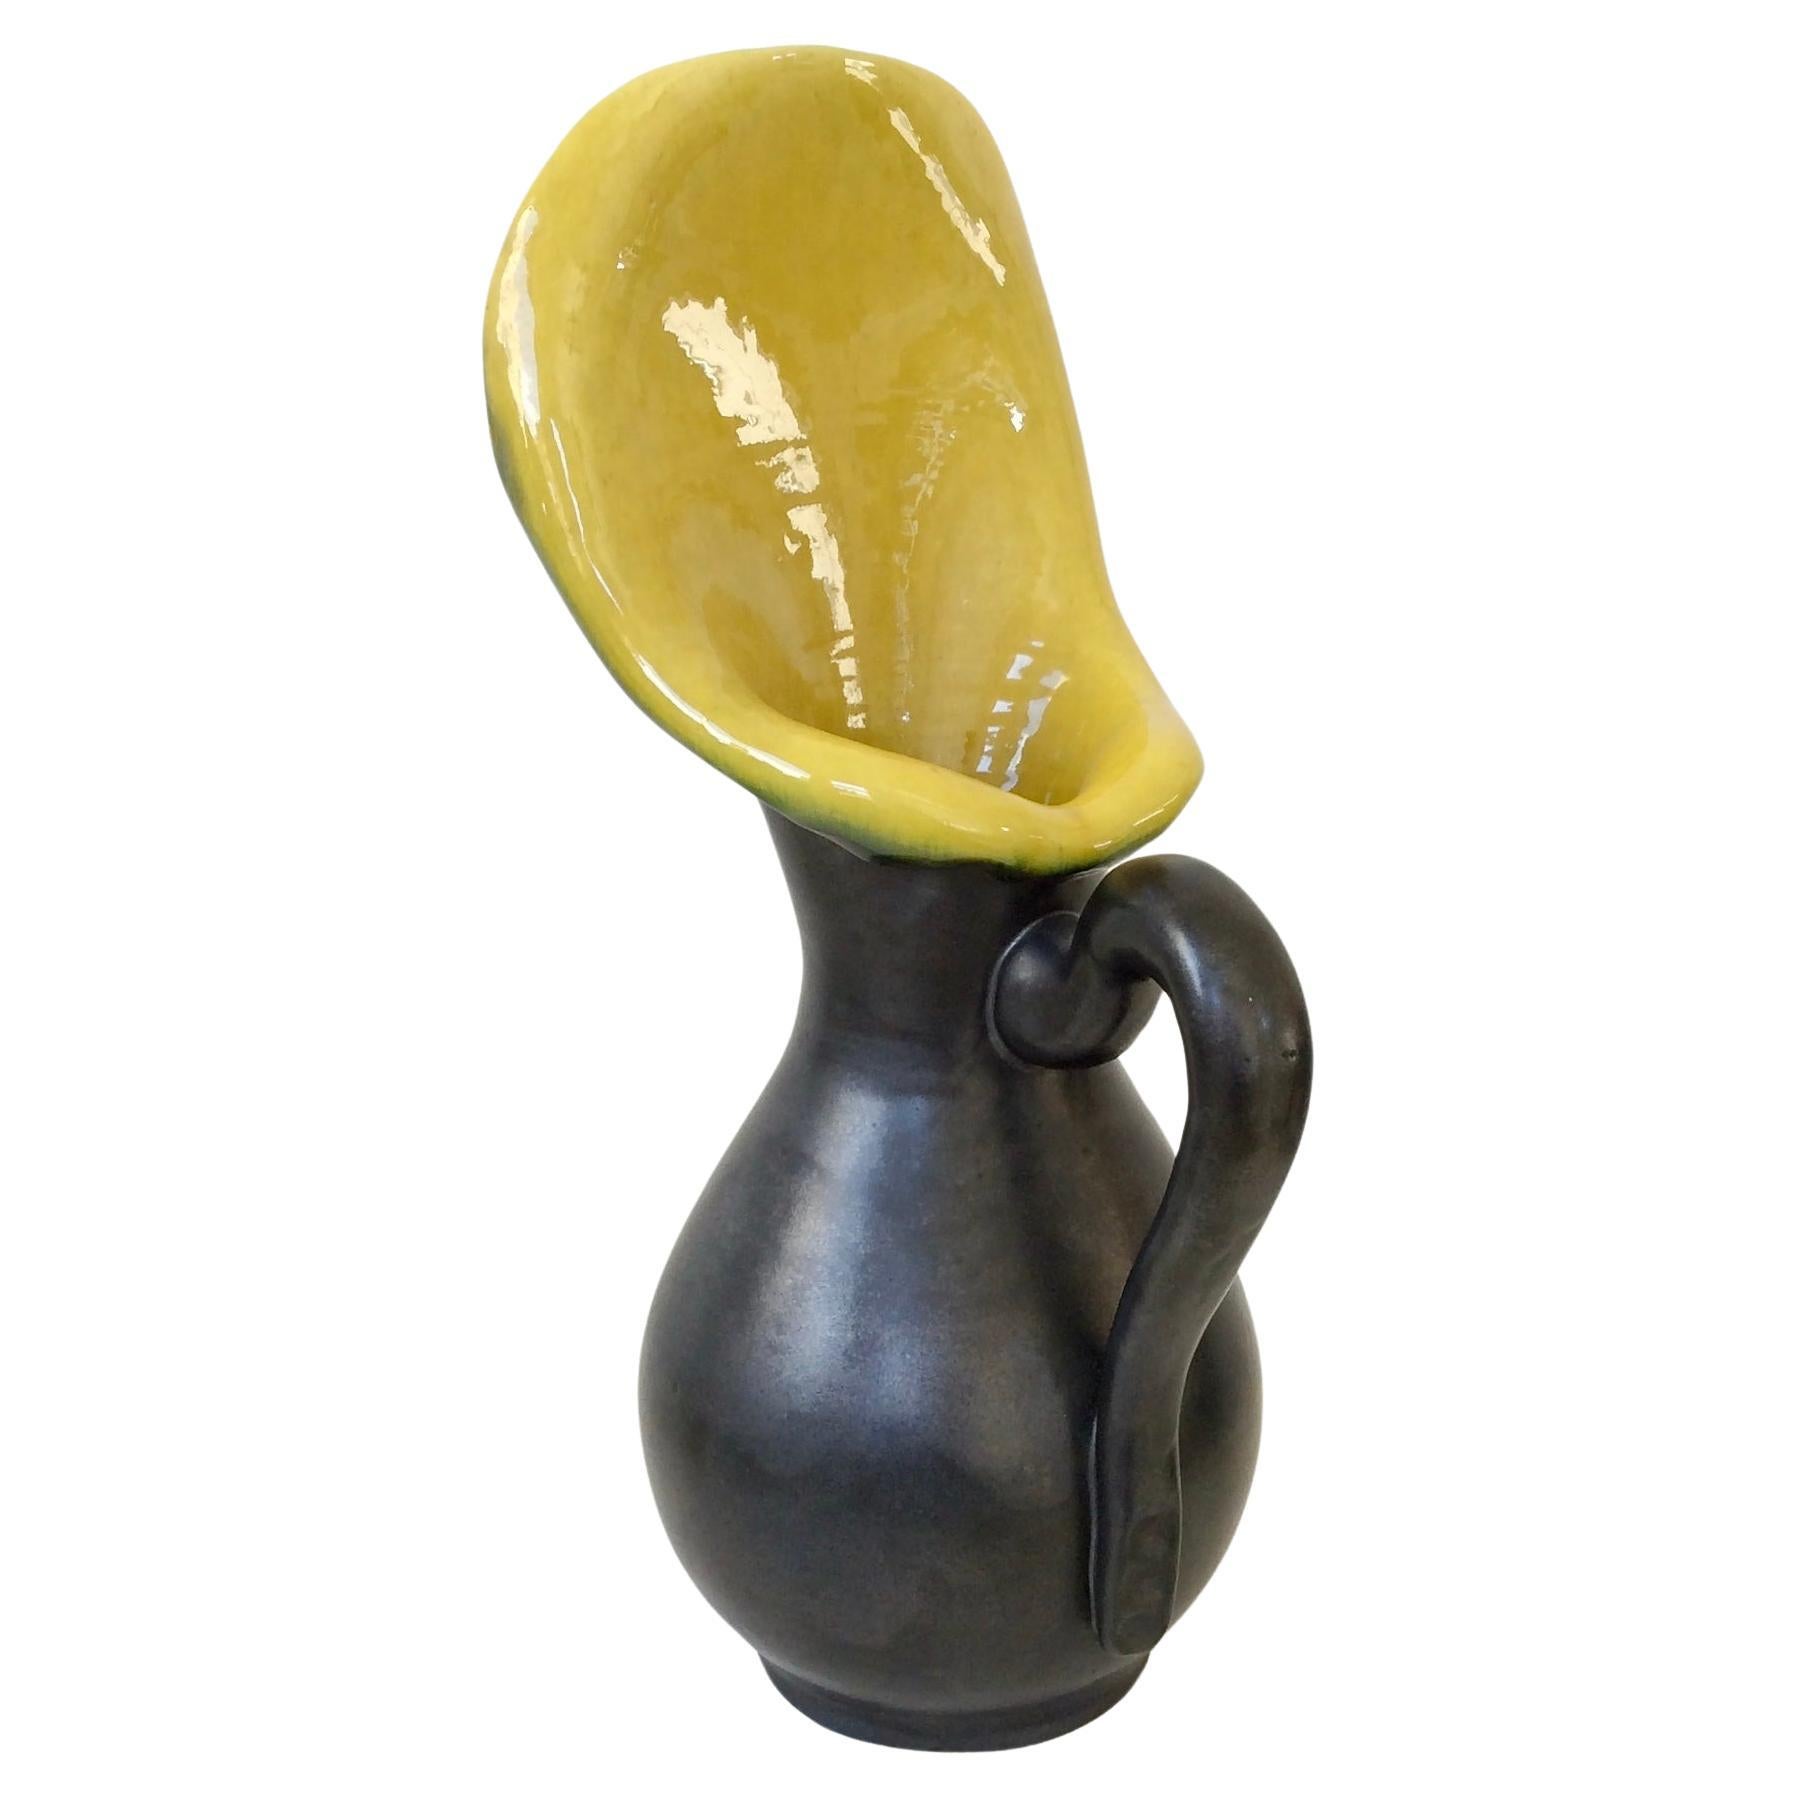 Pol Chambost ceramic jug, 837 model, circa 1950, France.
Black and yellow enameled earthenware.
Dimensions: 40 cm H, 20 cm W, 17 cm D.
Good original condition.
Bibliography: Pol Chambost, Sculpteur-Ceramiste 1906-1983, Somogy Editions